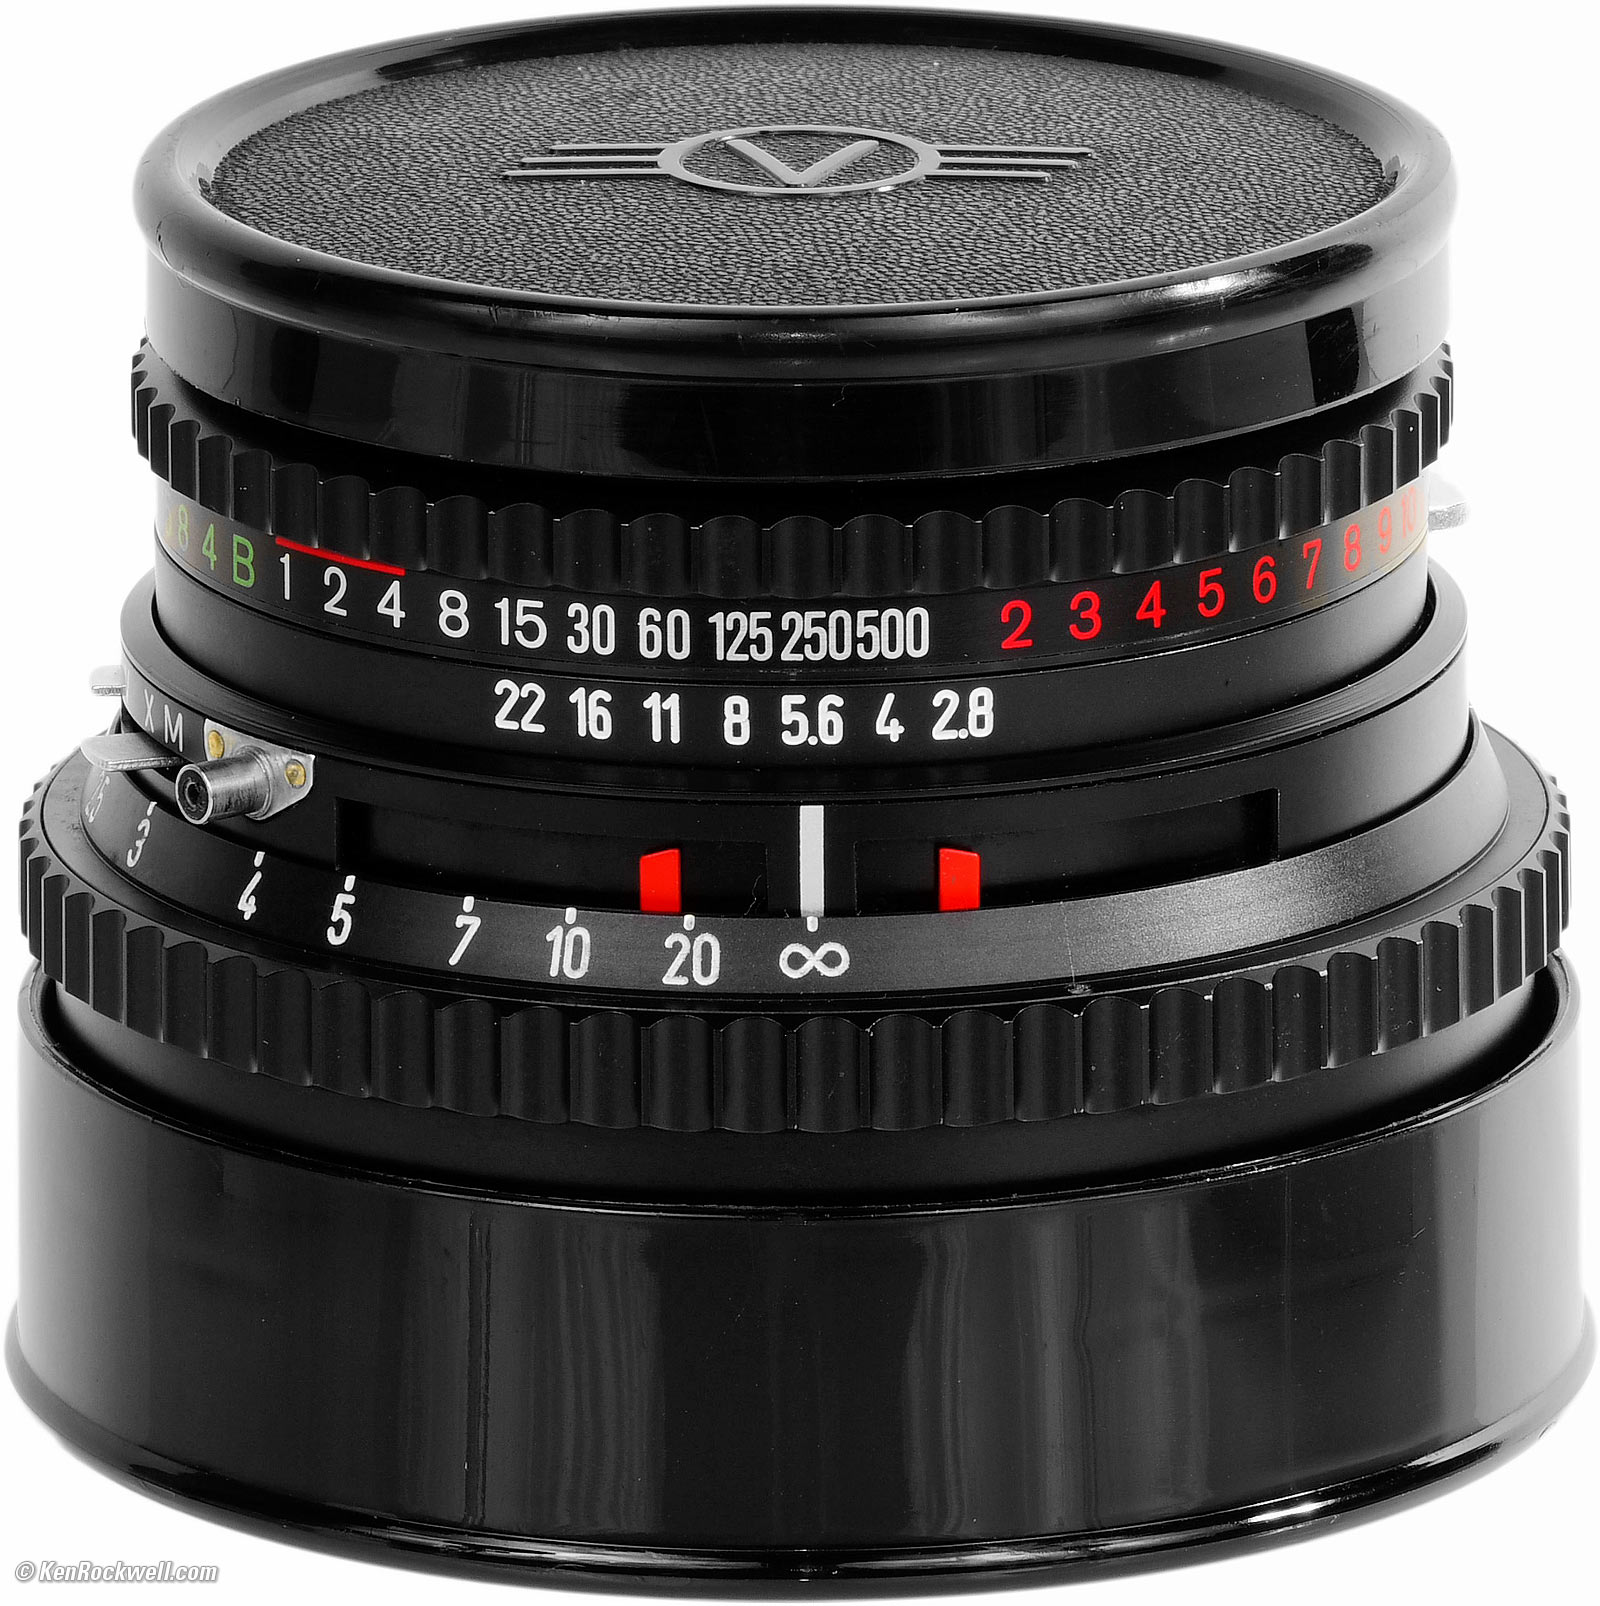 Hasselblad Zeiss Planar 80mm f/2.8 C Review